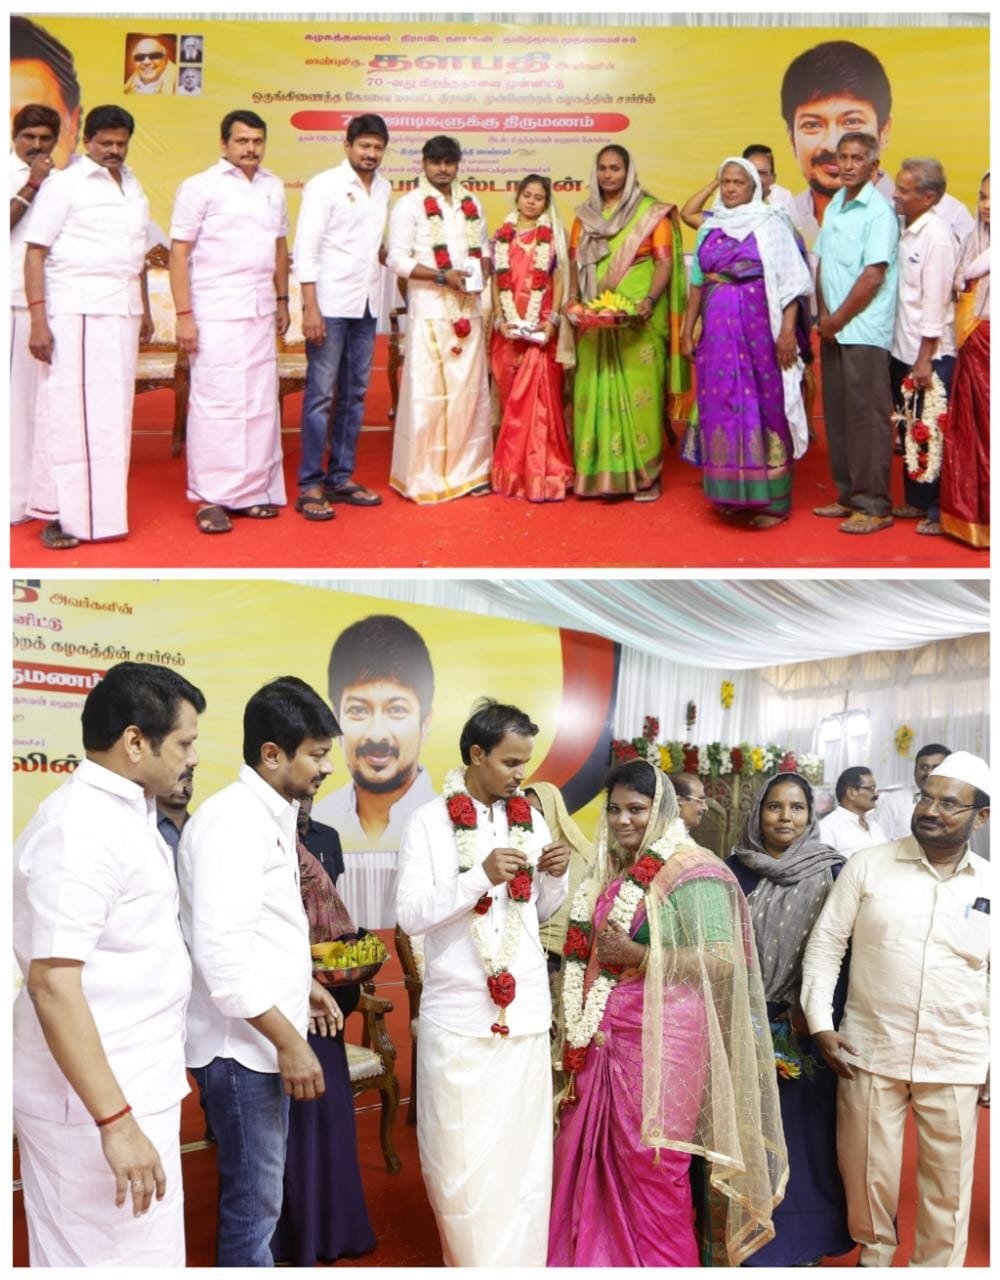 Minister Udhayanidhi Stalin Advises Newly Married Couples in Kovai